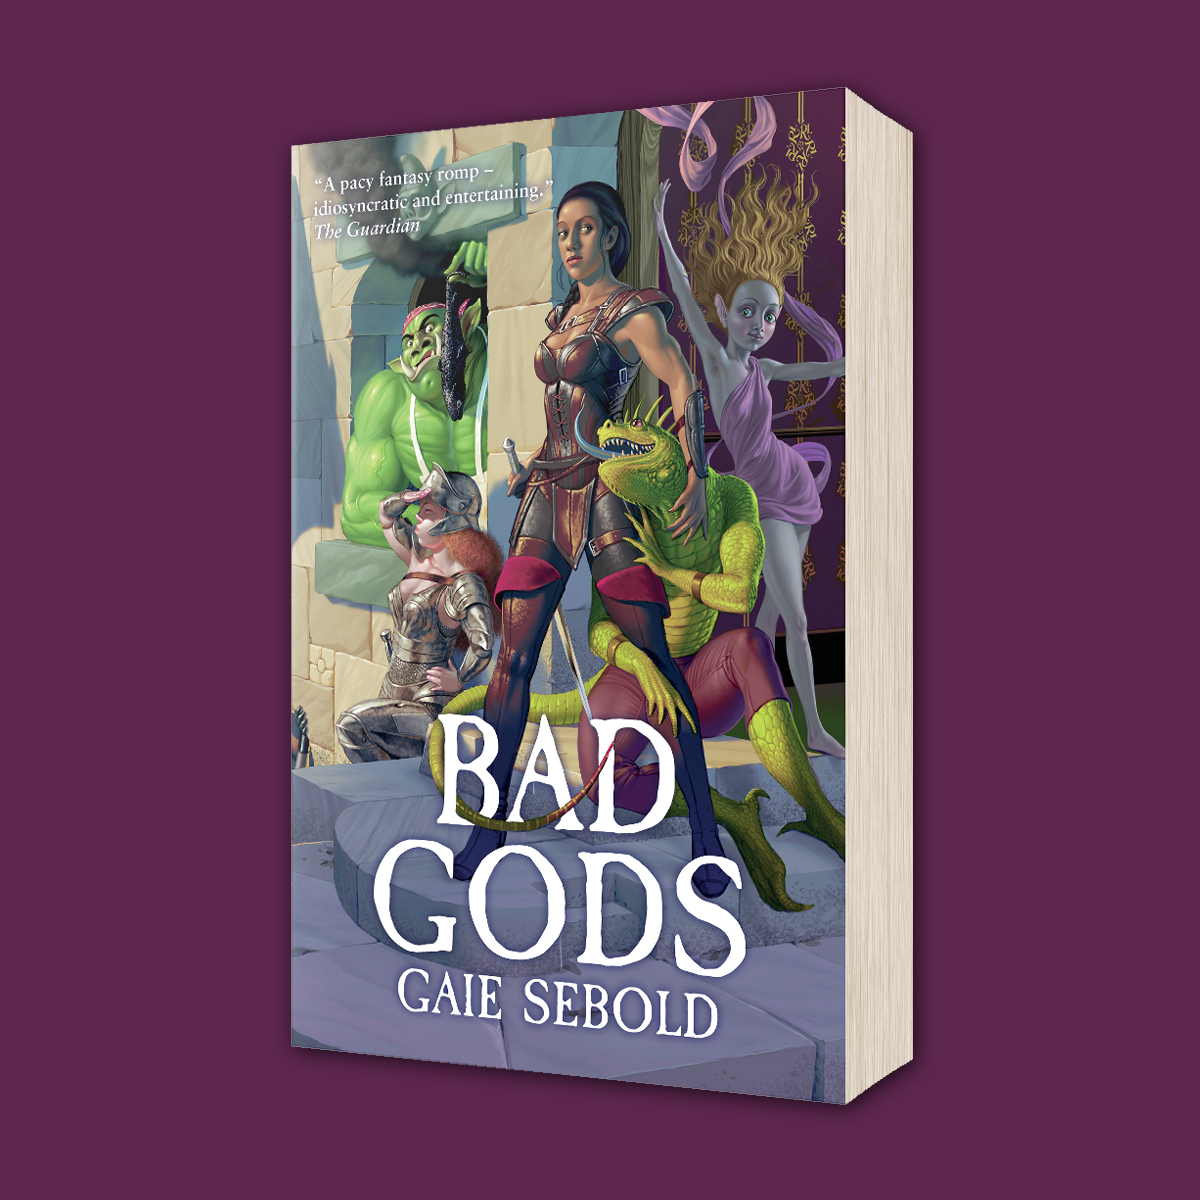 OUT NOW: Bad Gods by Gaie Sebold!